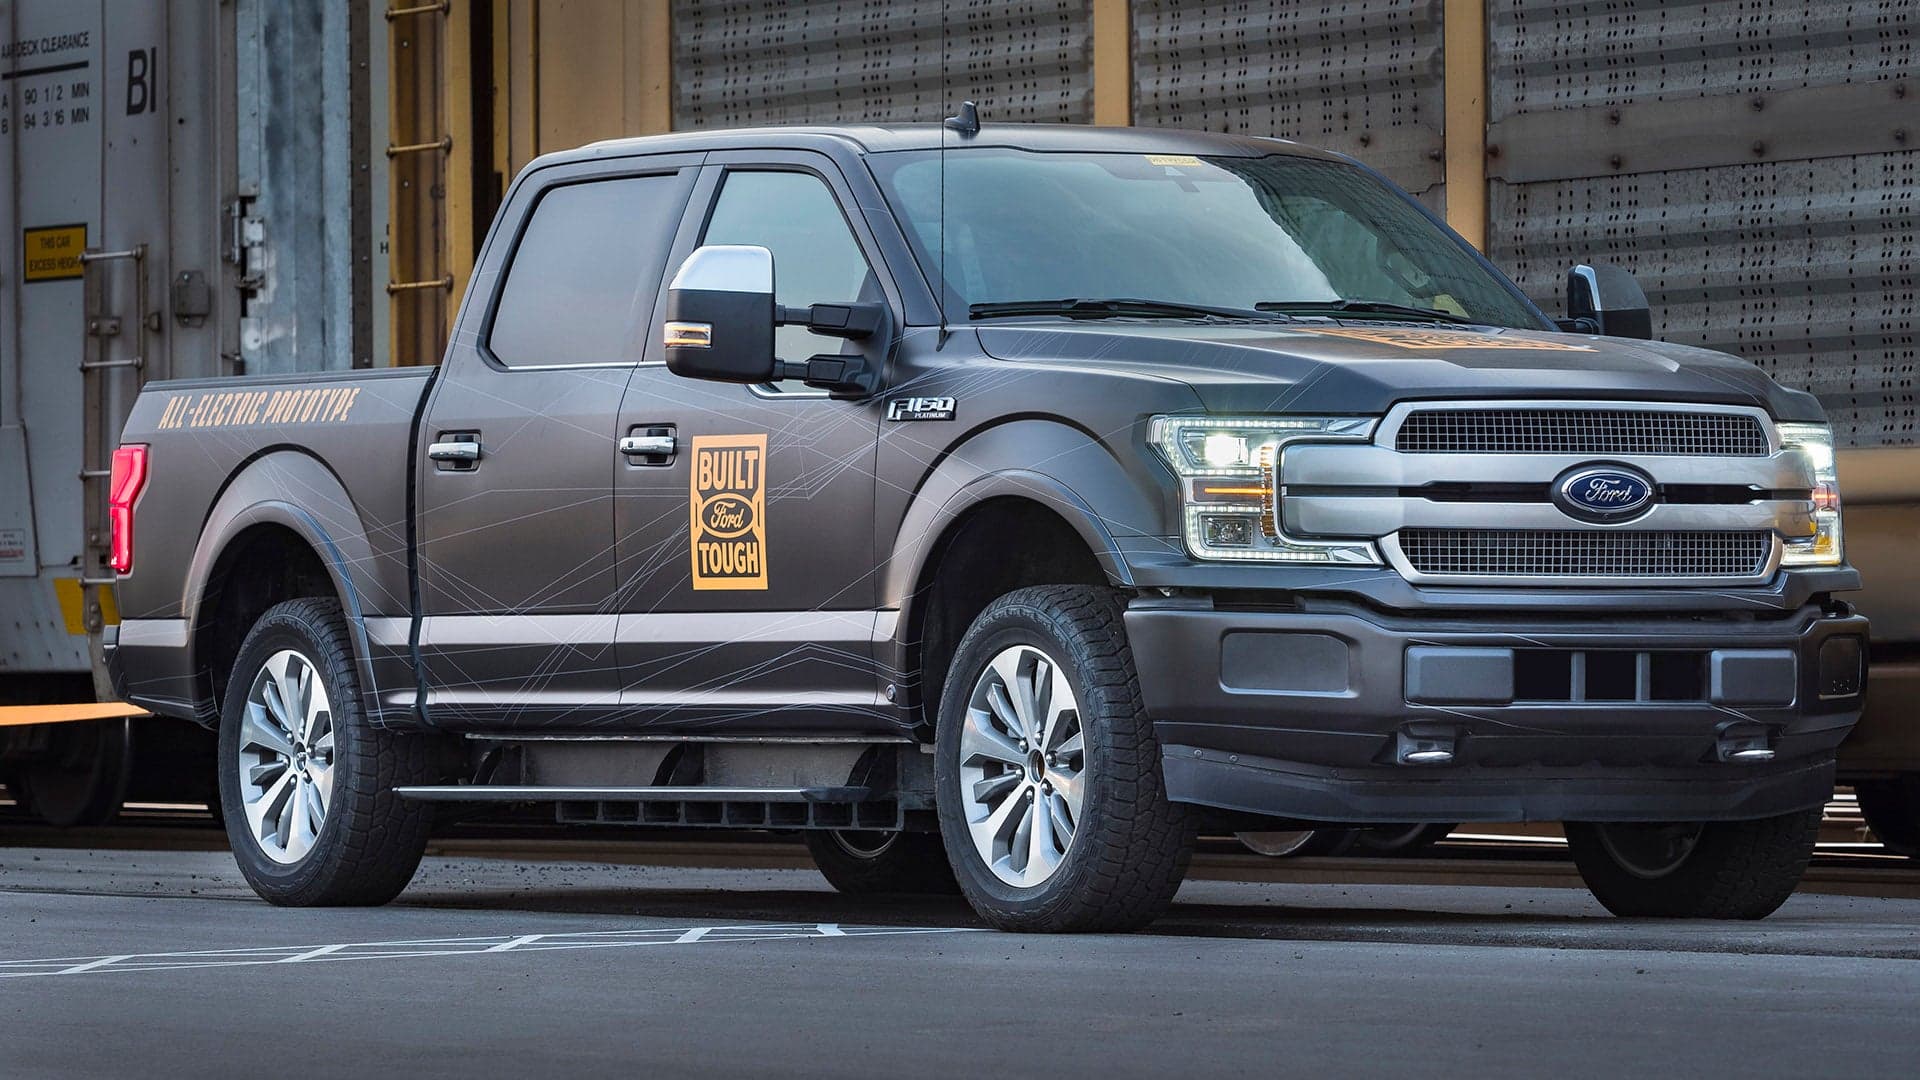 Electric-Only Ford F-150 Pickup Truck Could Hit Market in 2021: Report